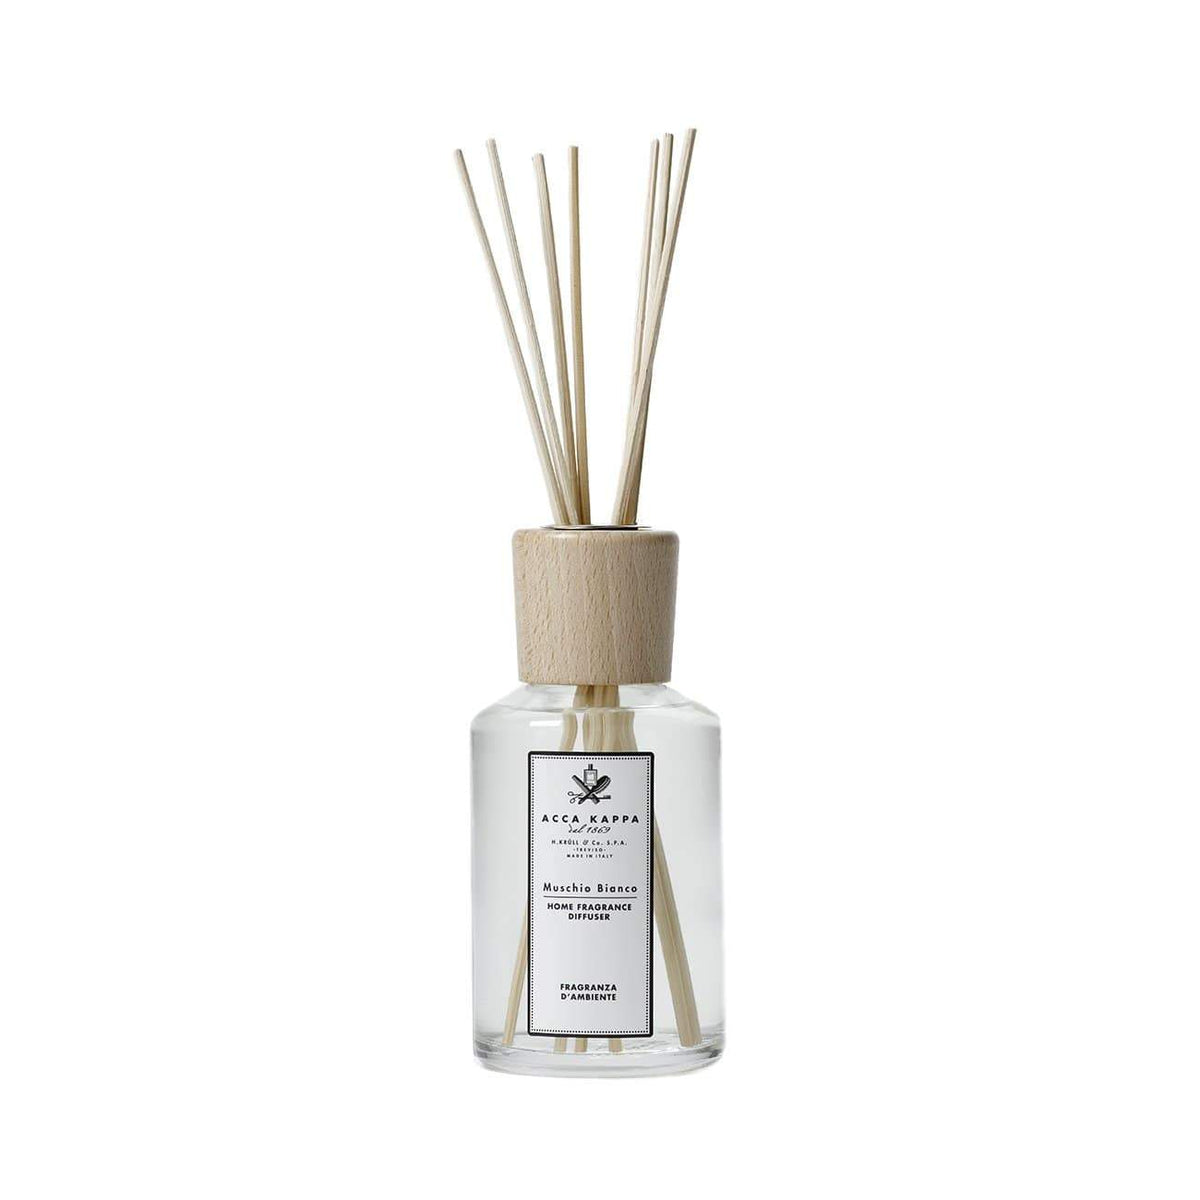 Acca Kappa White Moss Diffuser + Reeds: Official Stockist